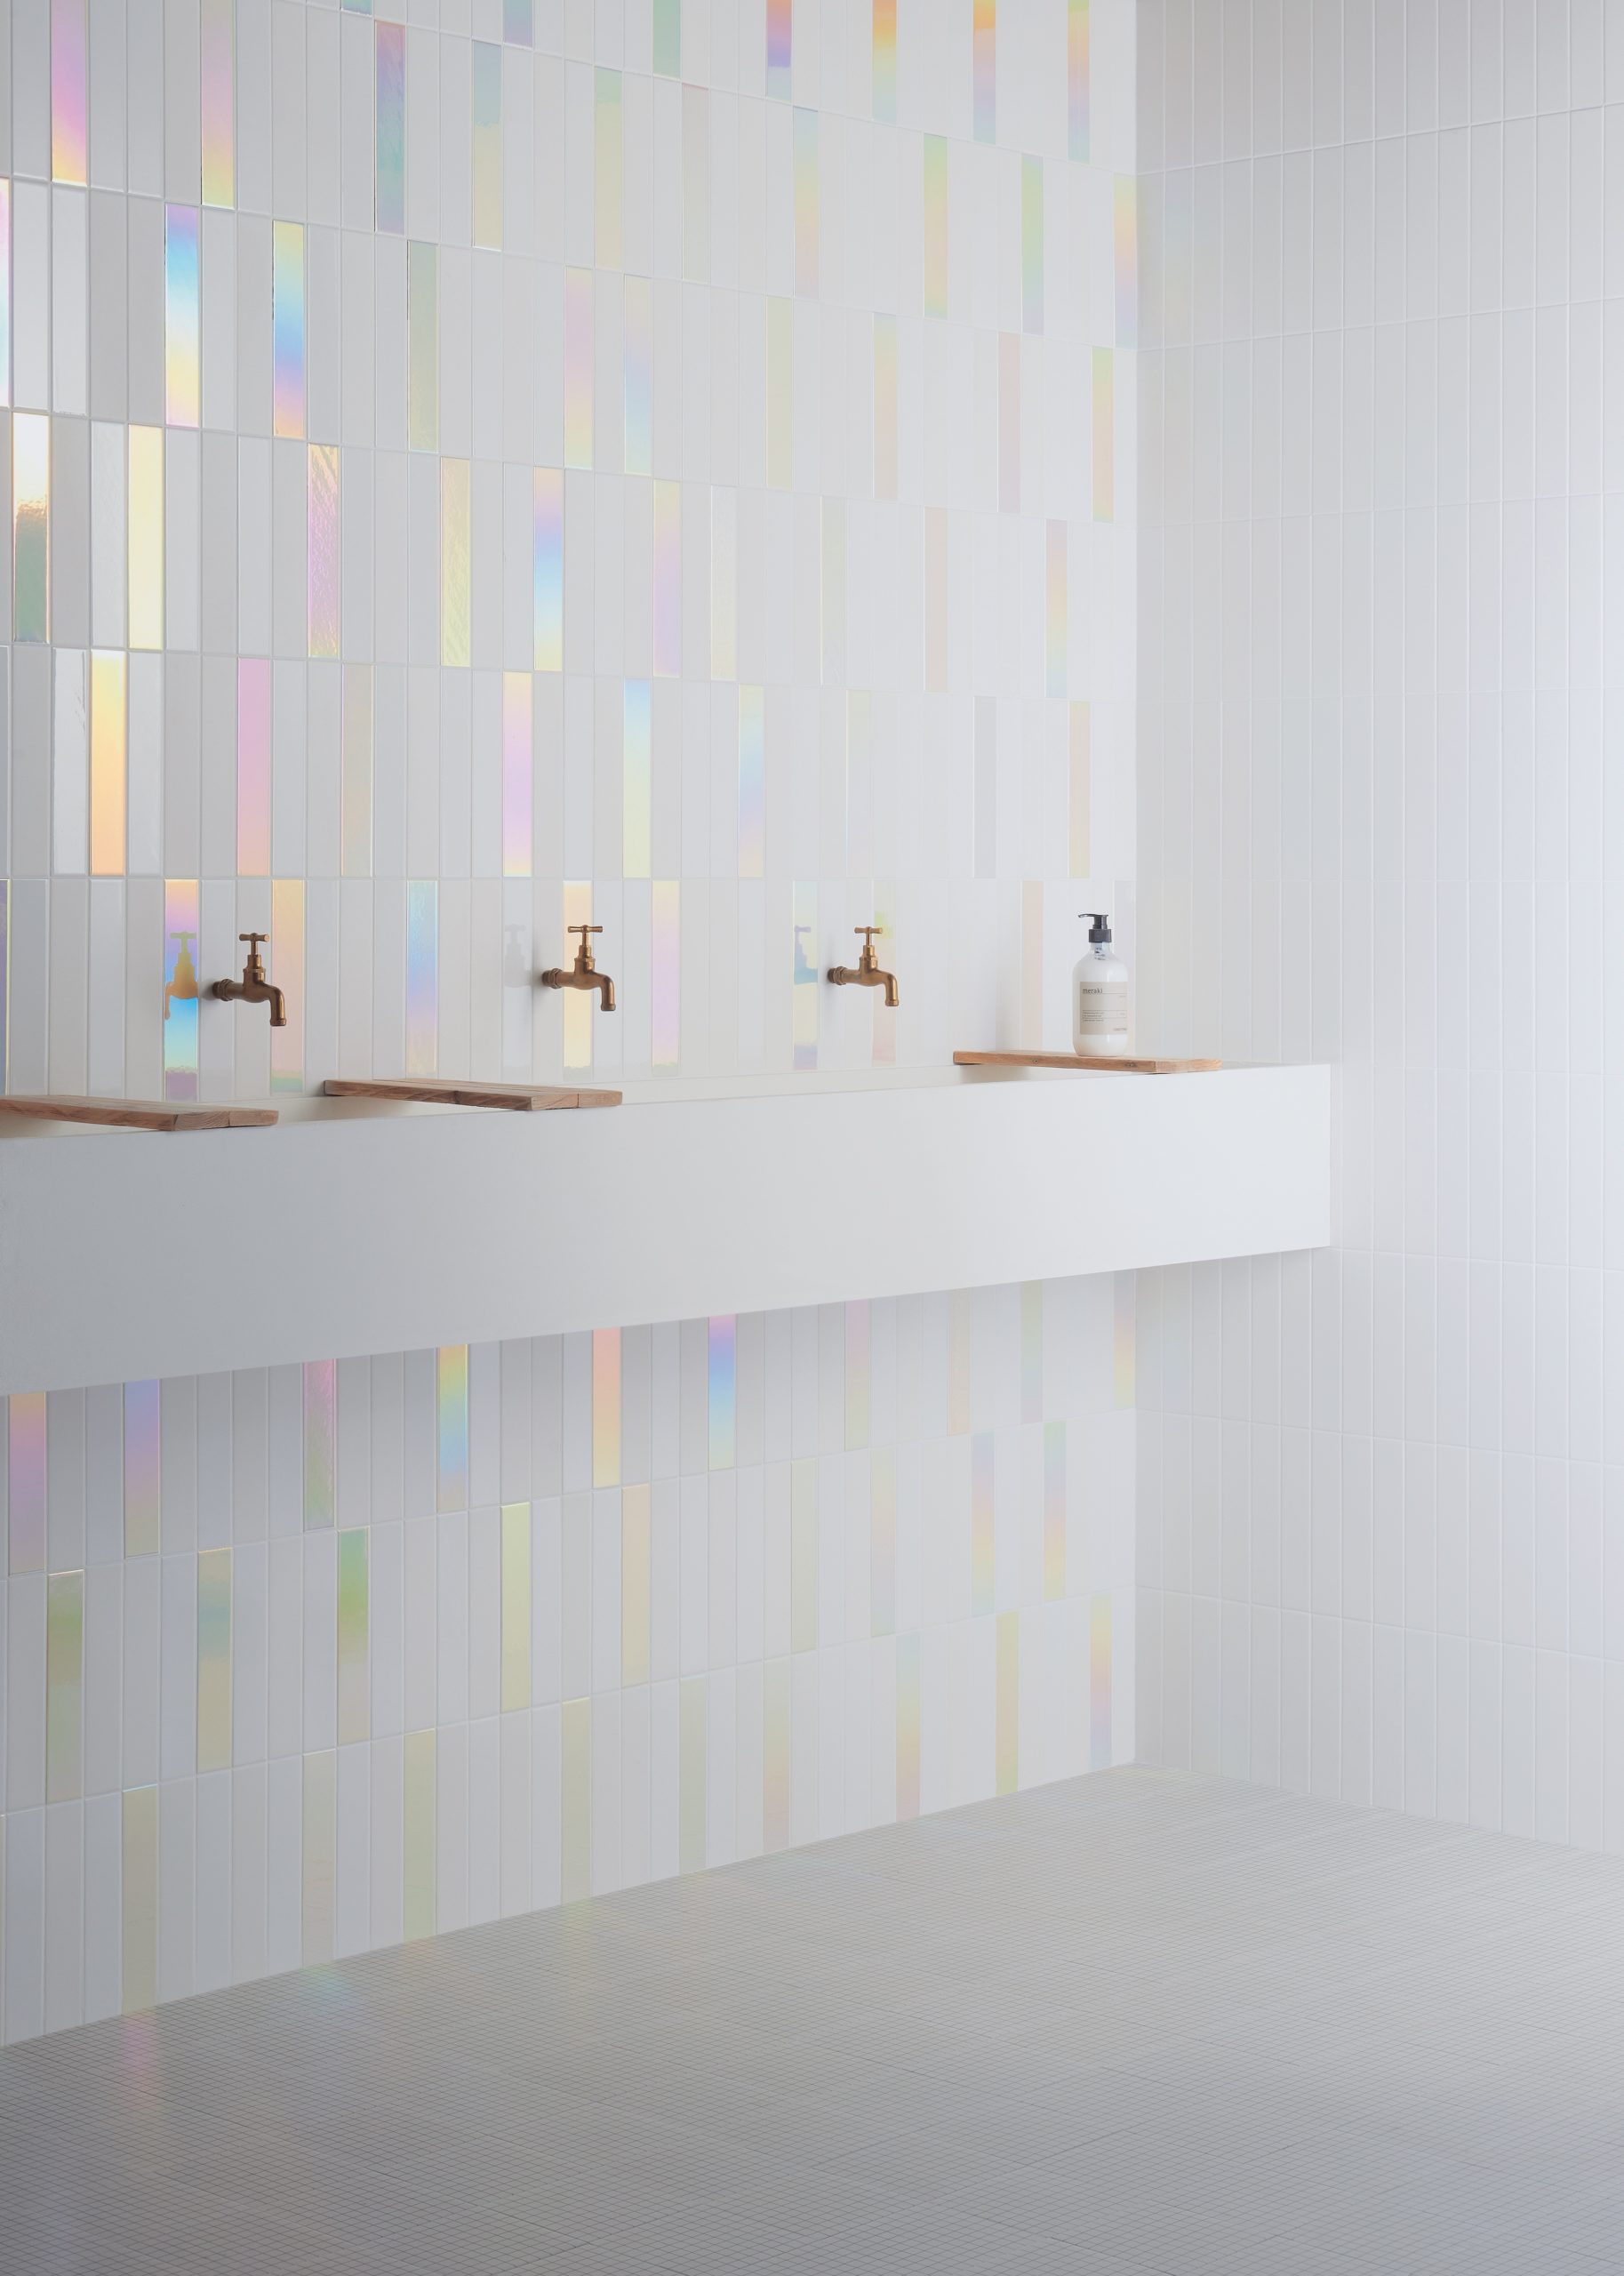 Tiles from Nemo Tile + Stone's Glow collection.